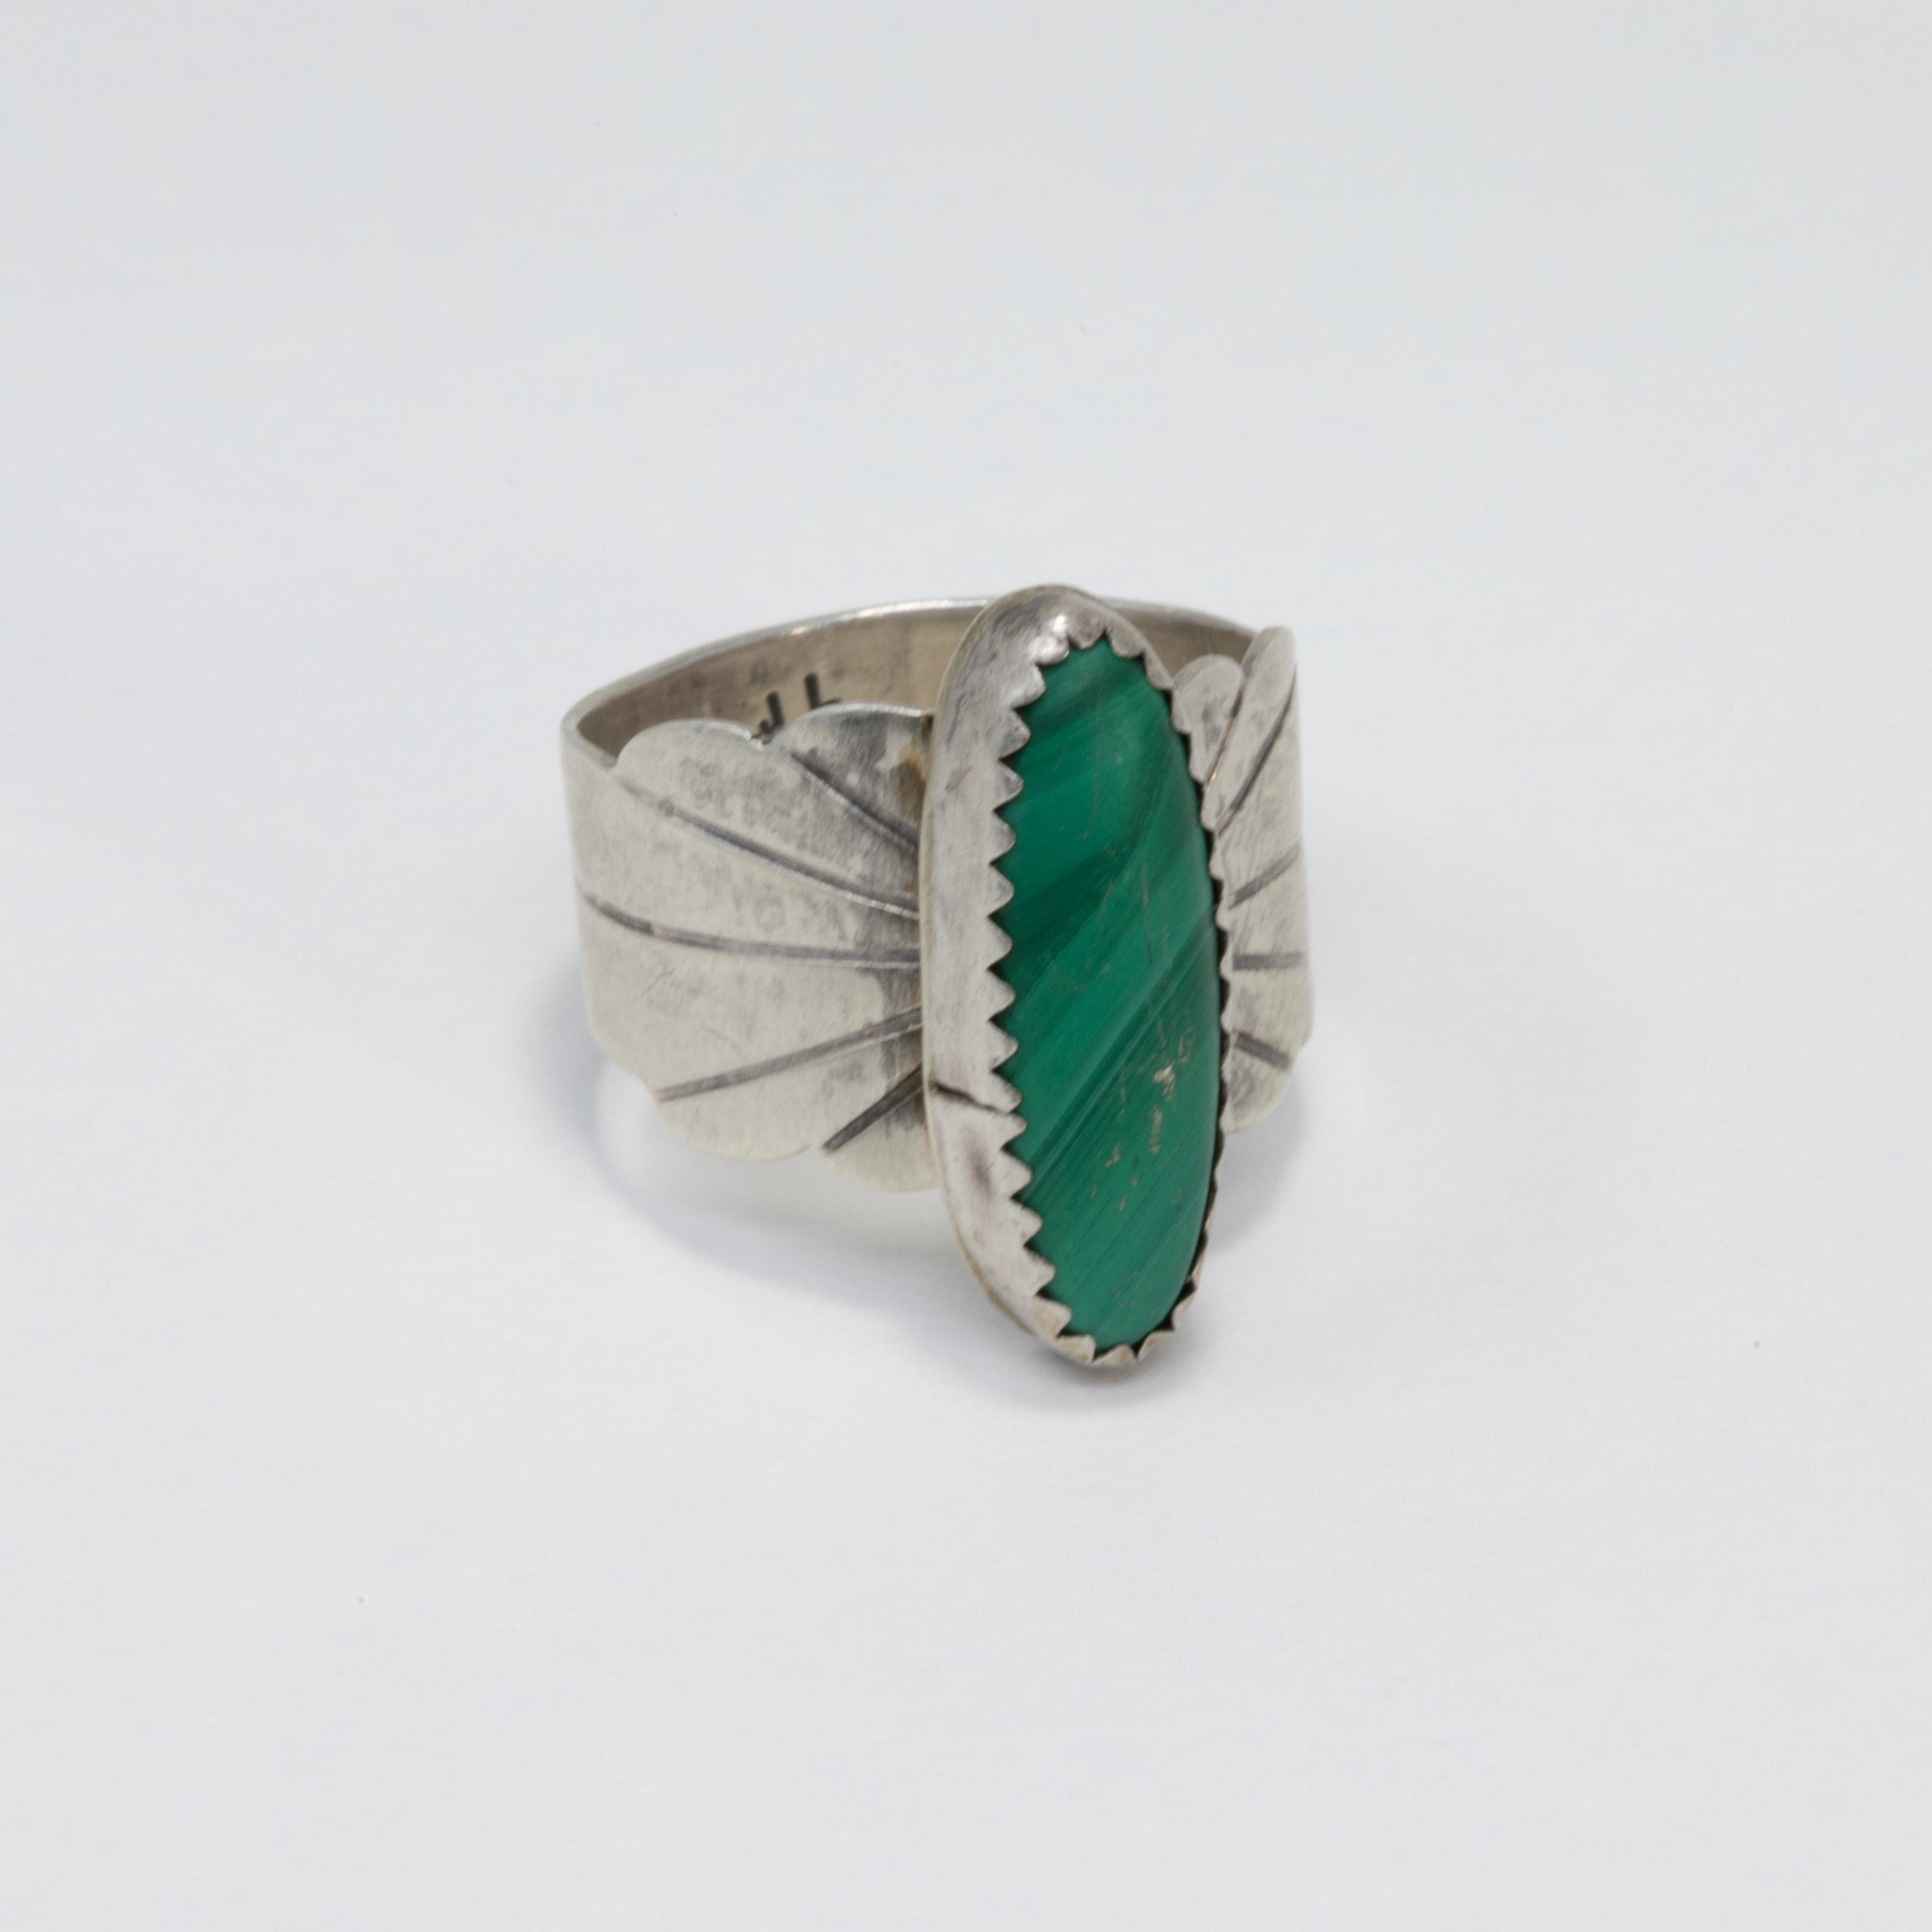 An exquisite vintage cocktail ring! This Native American accessory features an accented sterling silver band with a malachite cabochon. Navajo design and make.

Size: US 7

Marks / hallmarks / etc: JL Sterling